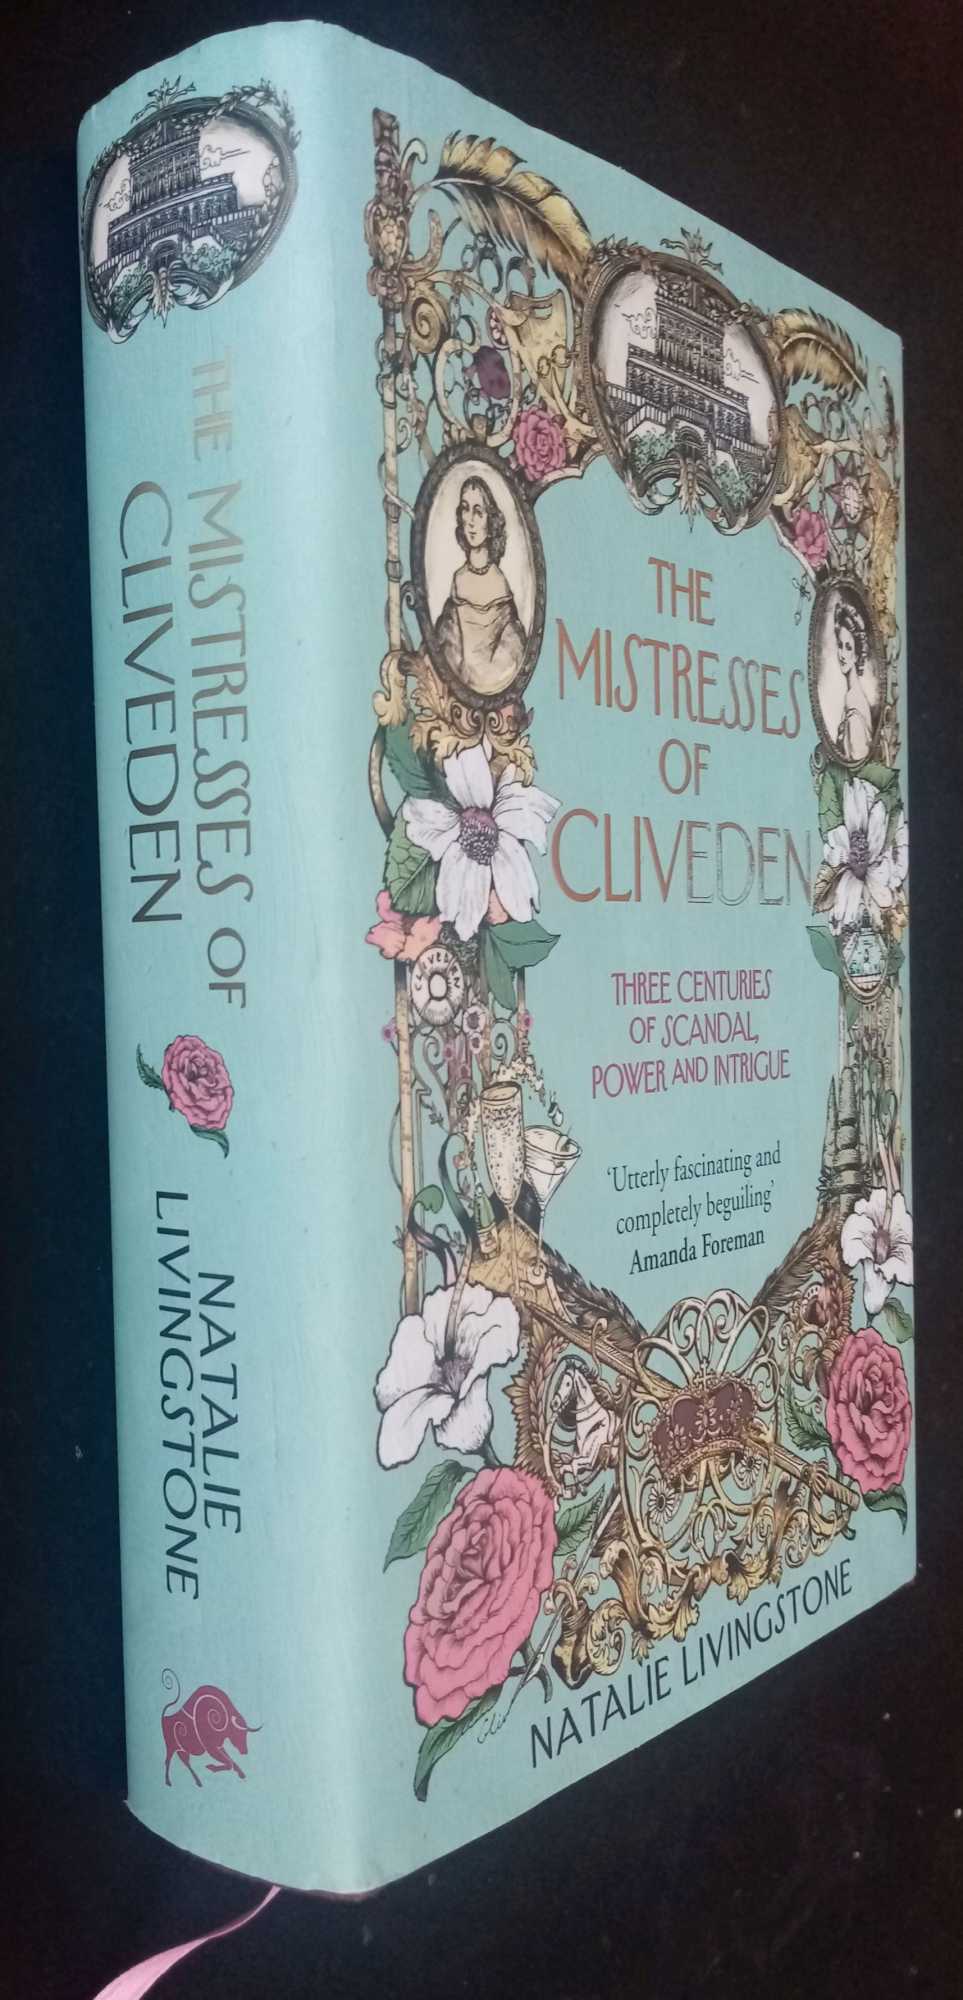 Natalie Livingstone - The Mistresses of Cliveden: Three Centuries of Scandal, Power and Intrigue in an English Stately Home